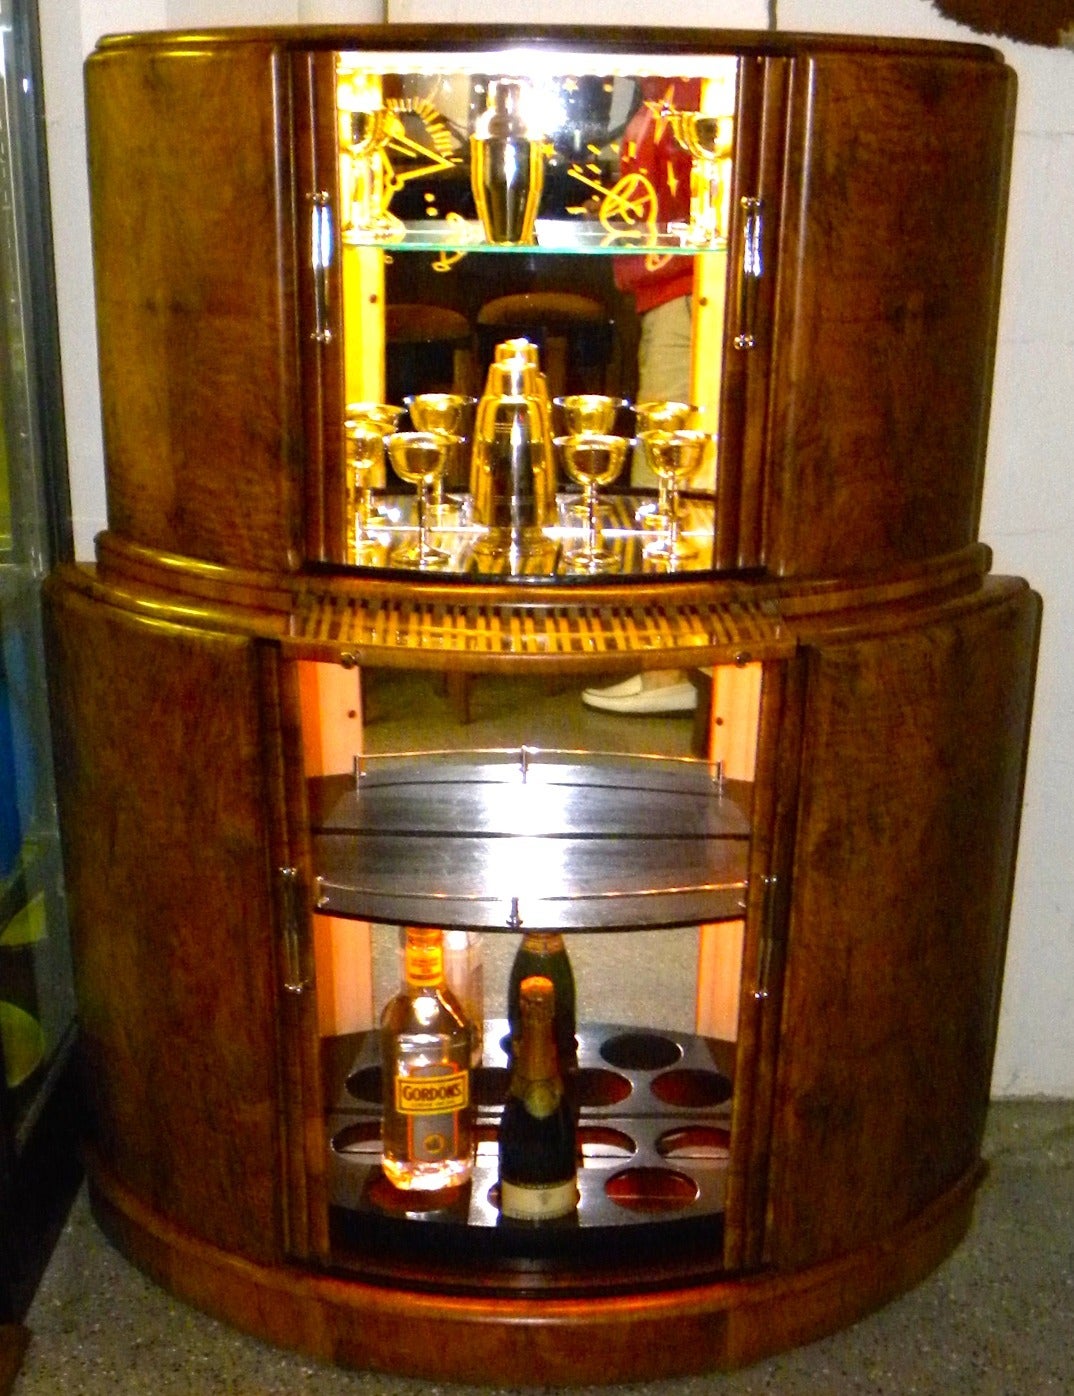 1930s Art Deco English demilune bar can fit all your needs. It smartly and securely holds bottles, glasses, cocktail implements and accessories. It offers a discreet then fun- to-pull-out mixing shelf. It boasts a gorgeous walnut cabinet with